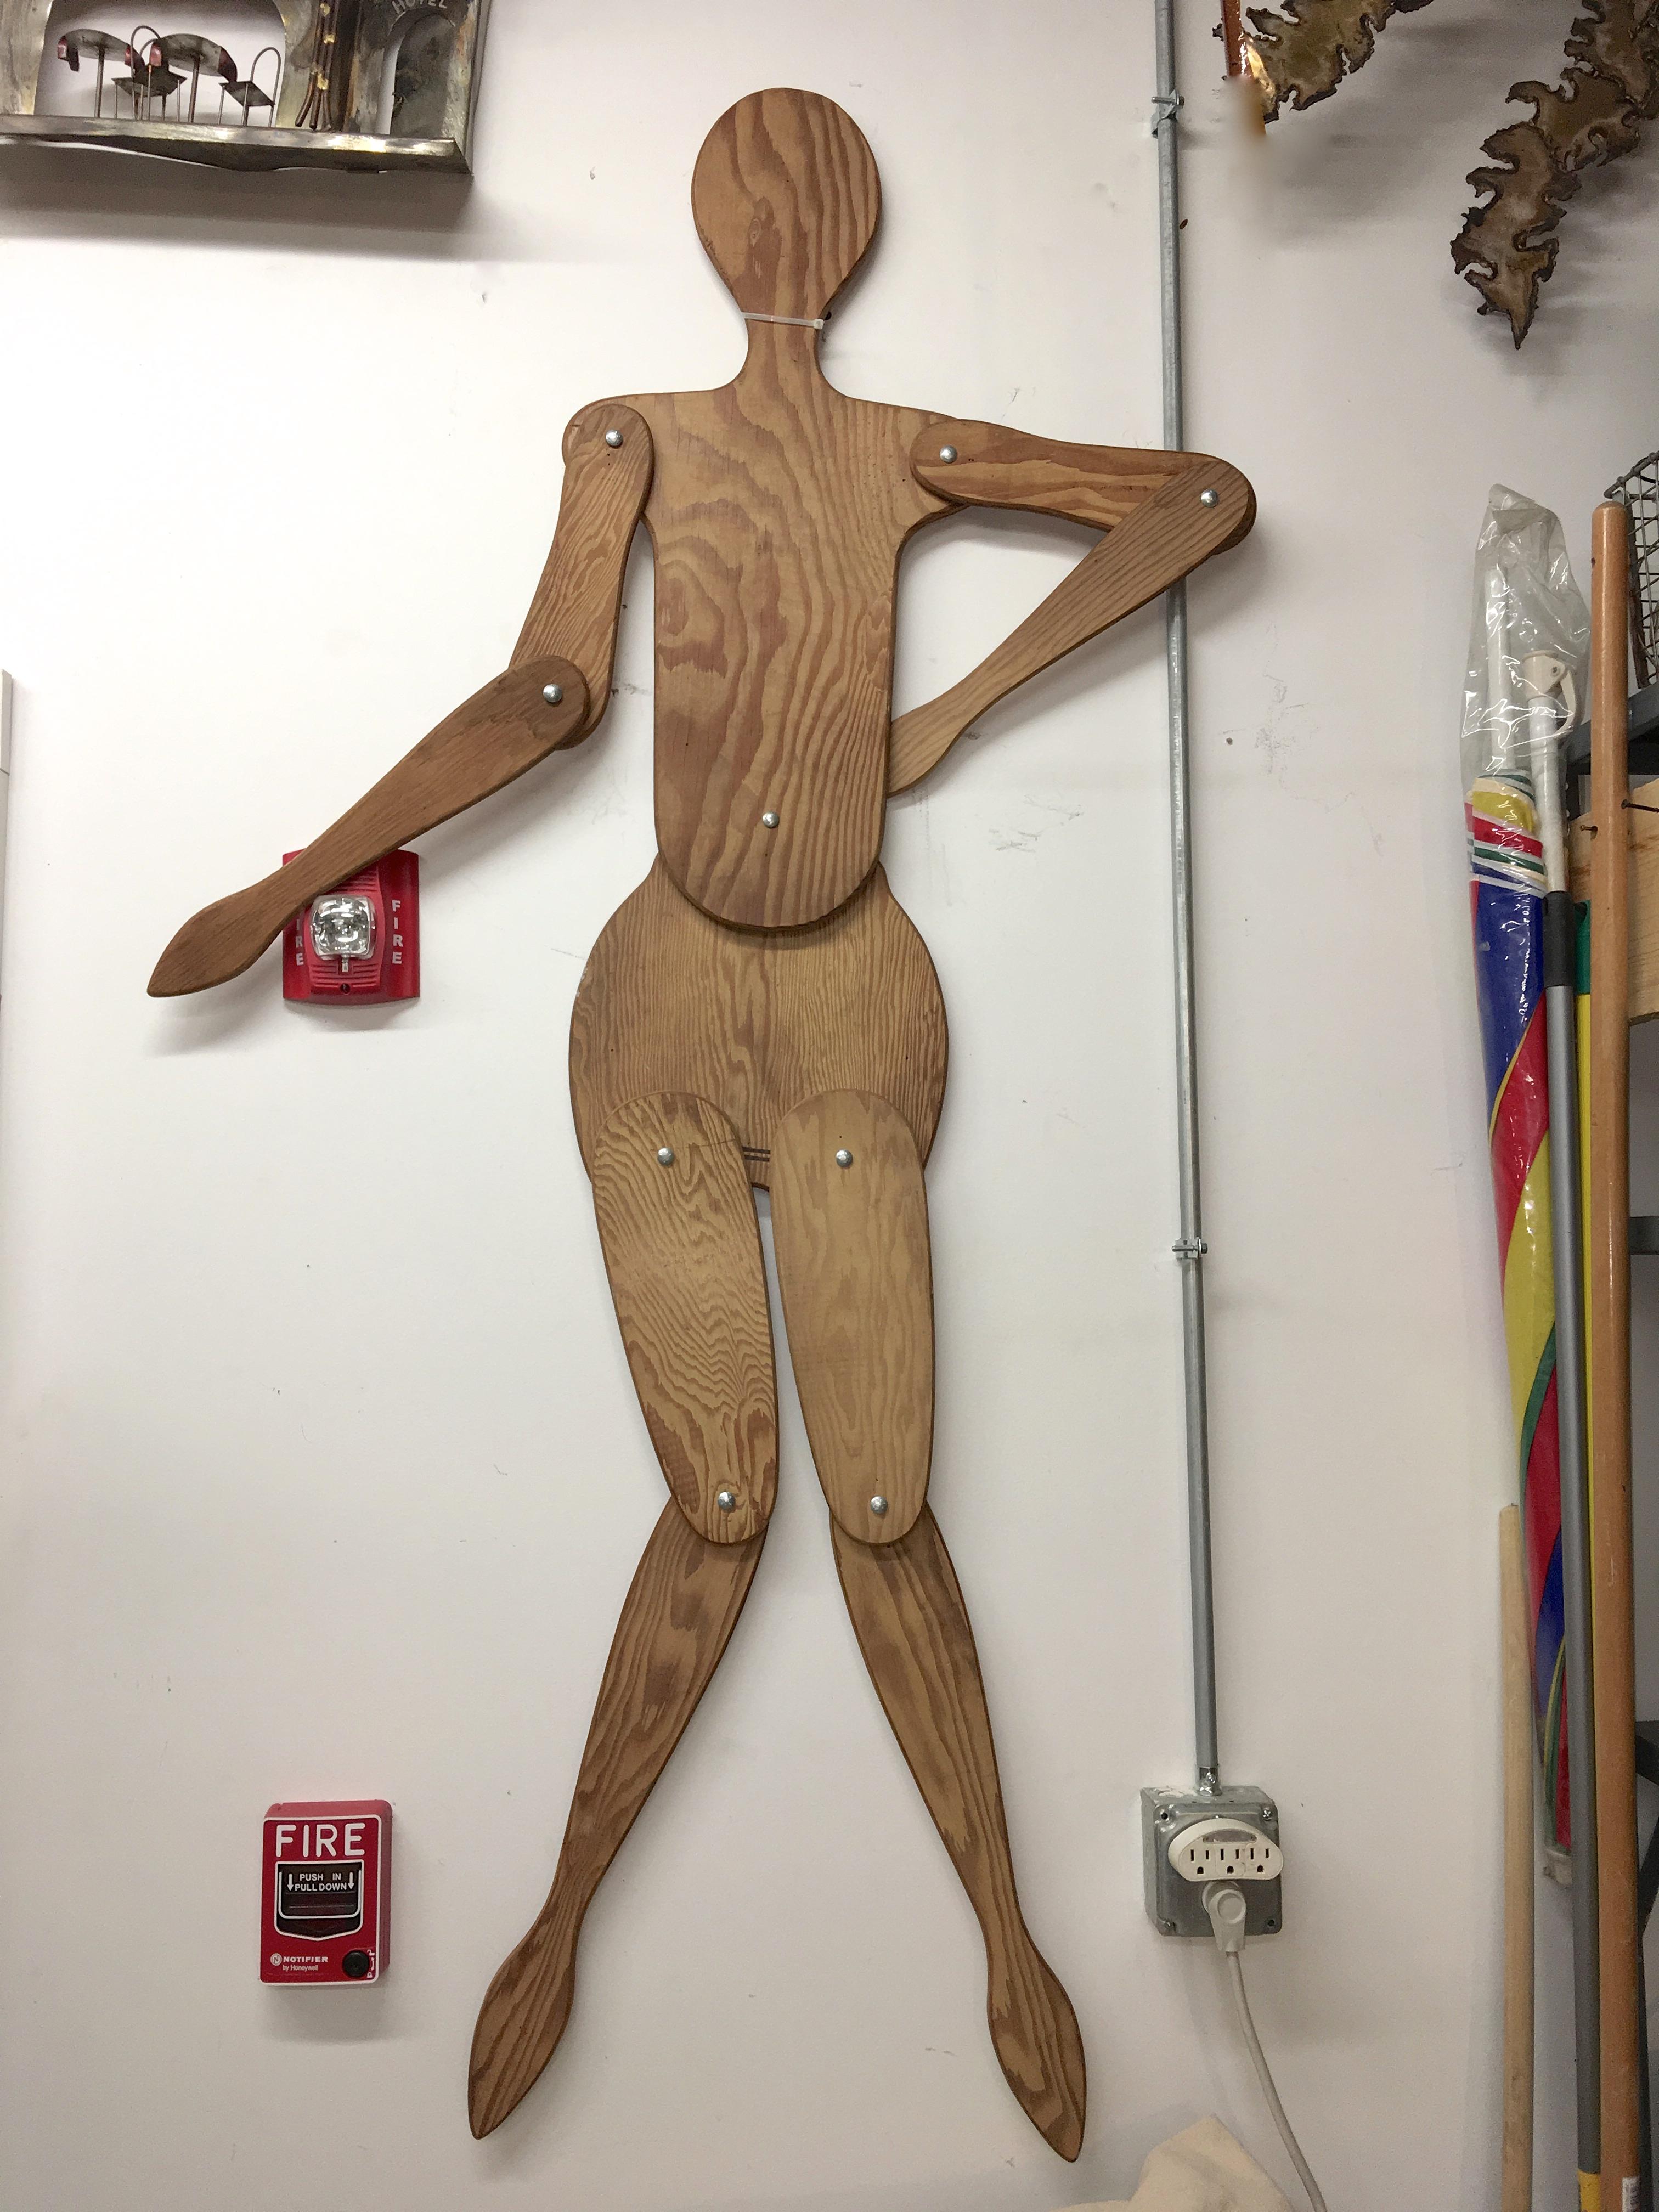 Peculiar Folk Art two-dimensional marionette or mannequin comprised of ten elements of cutout half inch plywood, connected with bolts and wing nuts, permitting the limbs to be moved in multiple positions. Possibly a tribute to Mario Ceroli.